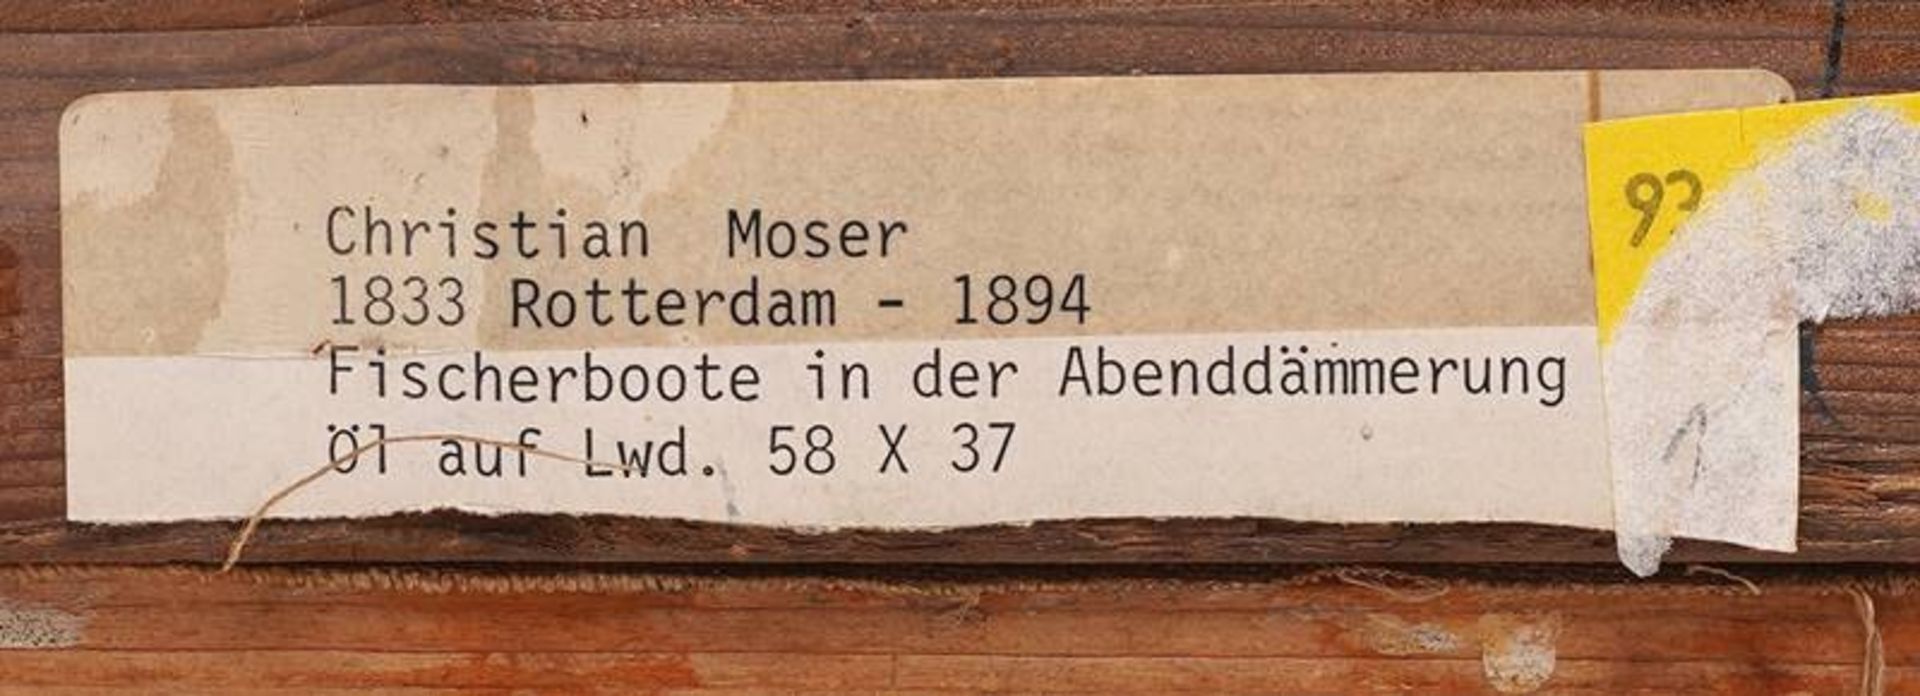 Moser, Christian - Image 5 of 5